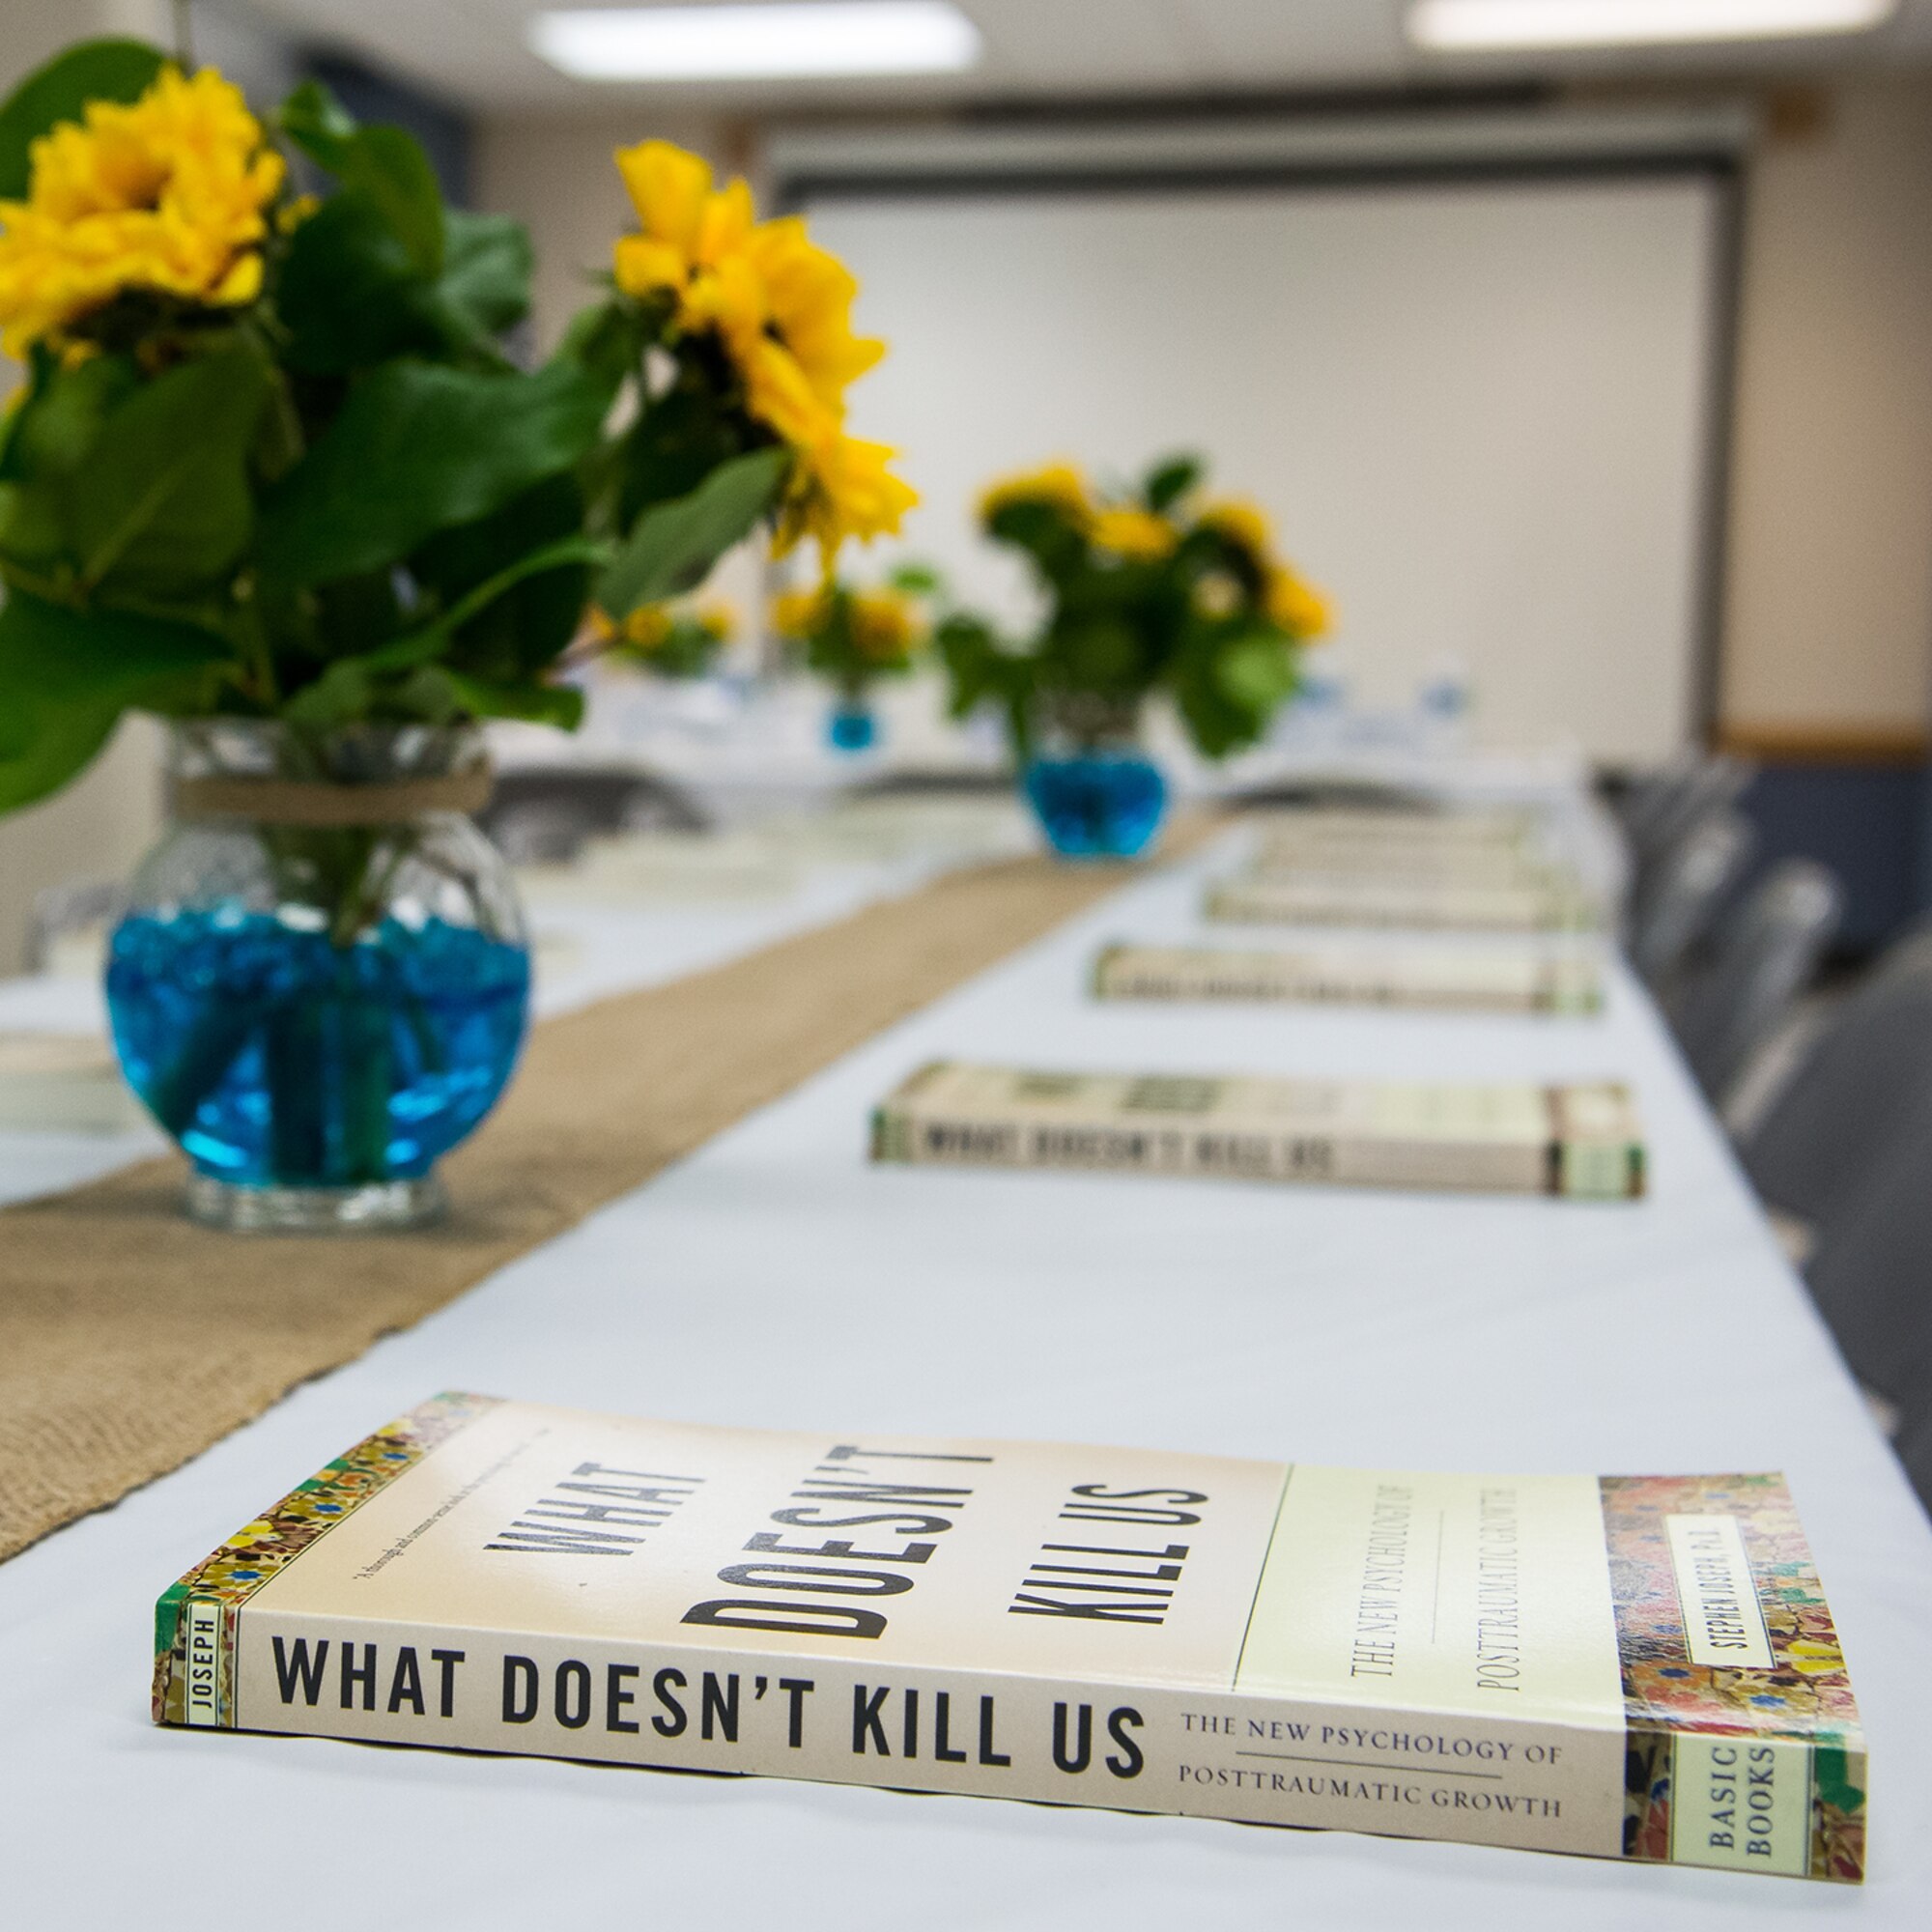 resiliency-themed books sit atop a table prior to the Spiritual Maintenance Breakfast at Hill Air Force Base, Utah, Sept. 22, 2016. Dozens of Team Hill military and civilian personnel gathered at the base chapel for fellowship, breakfast and spiritual maintenance. (U.S. Air Force photo by R. Nial Bradshaw)